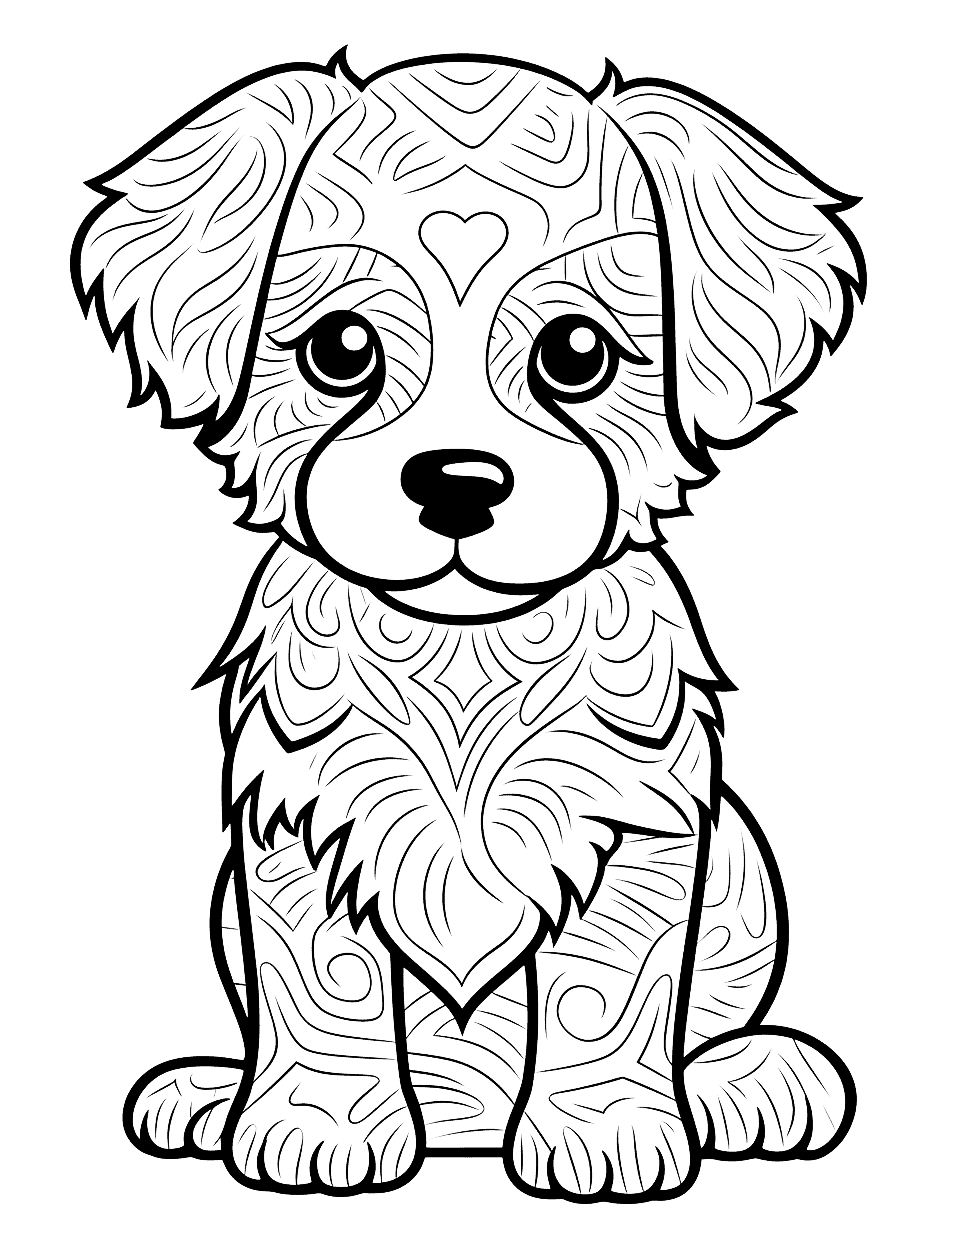 Artistic Approach Abstract Art of Puppy Coloring Page - A coloring page featuring an abstract art piece of a puppy.